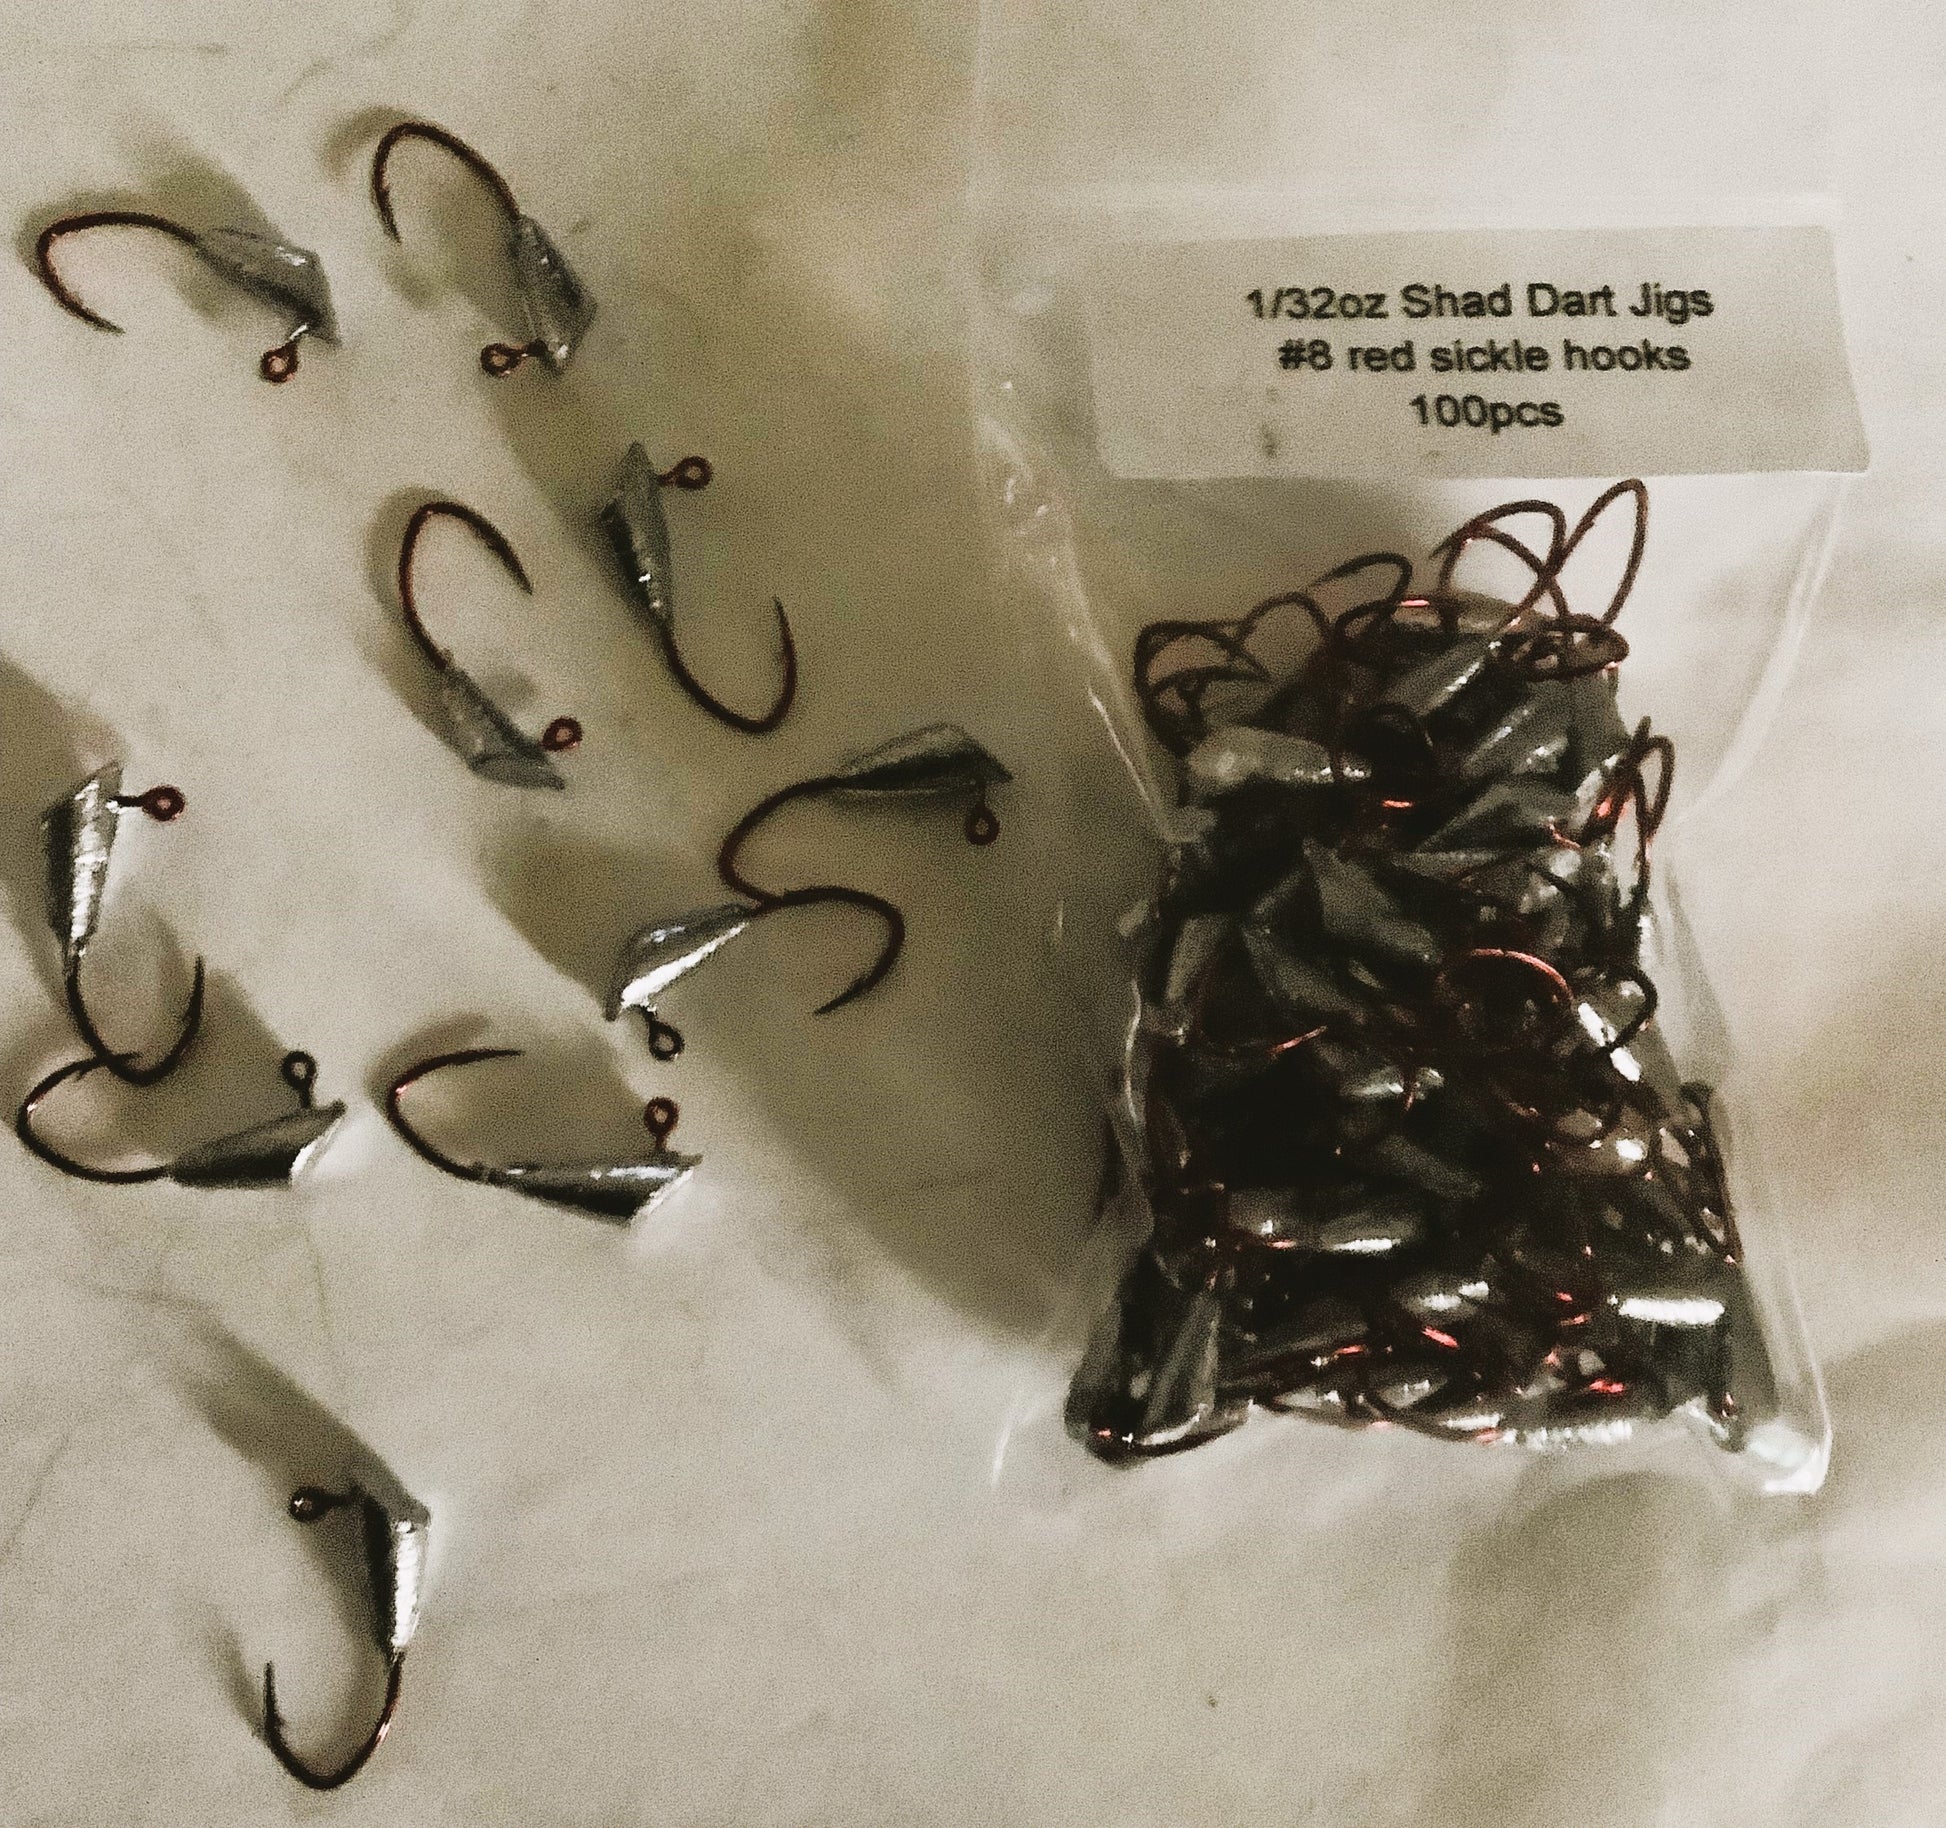 shad dart jigs 1/64, 1/32, 1/16, and 1/8 ounce 100 pcs – M & C's  Handcrafted Jigs & Lures